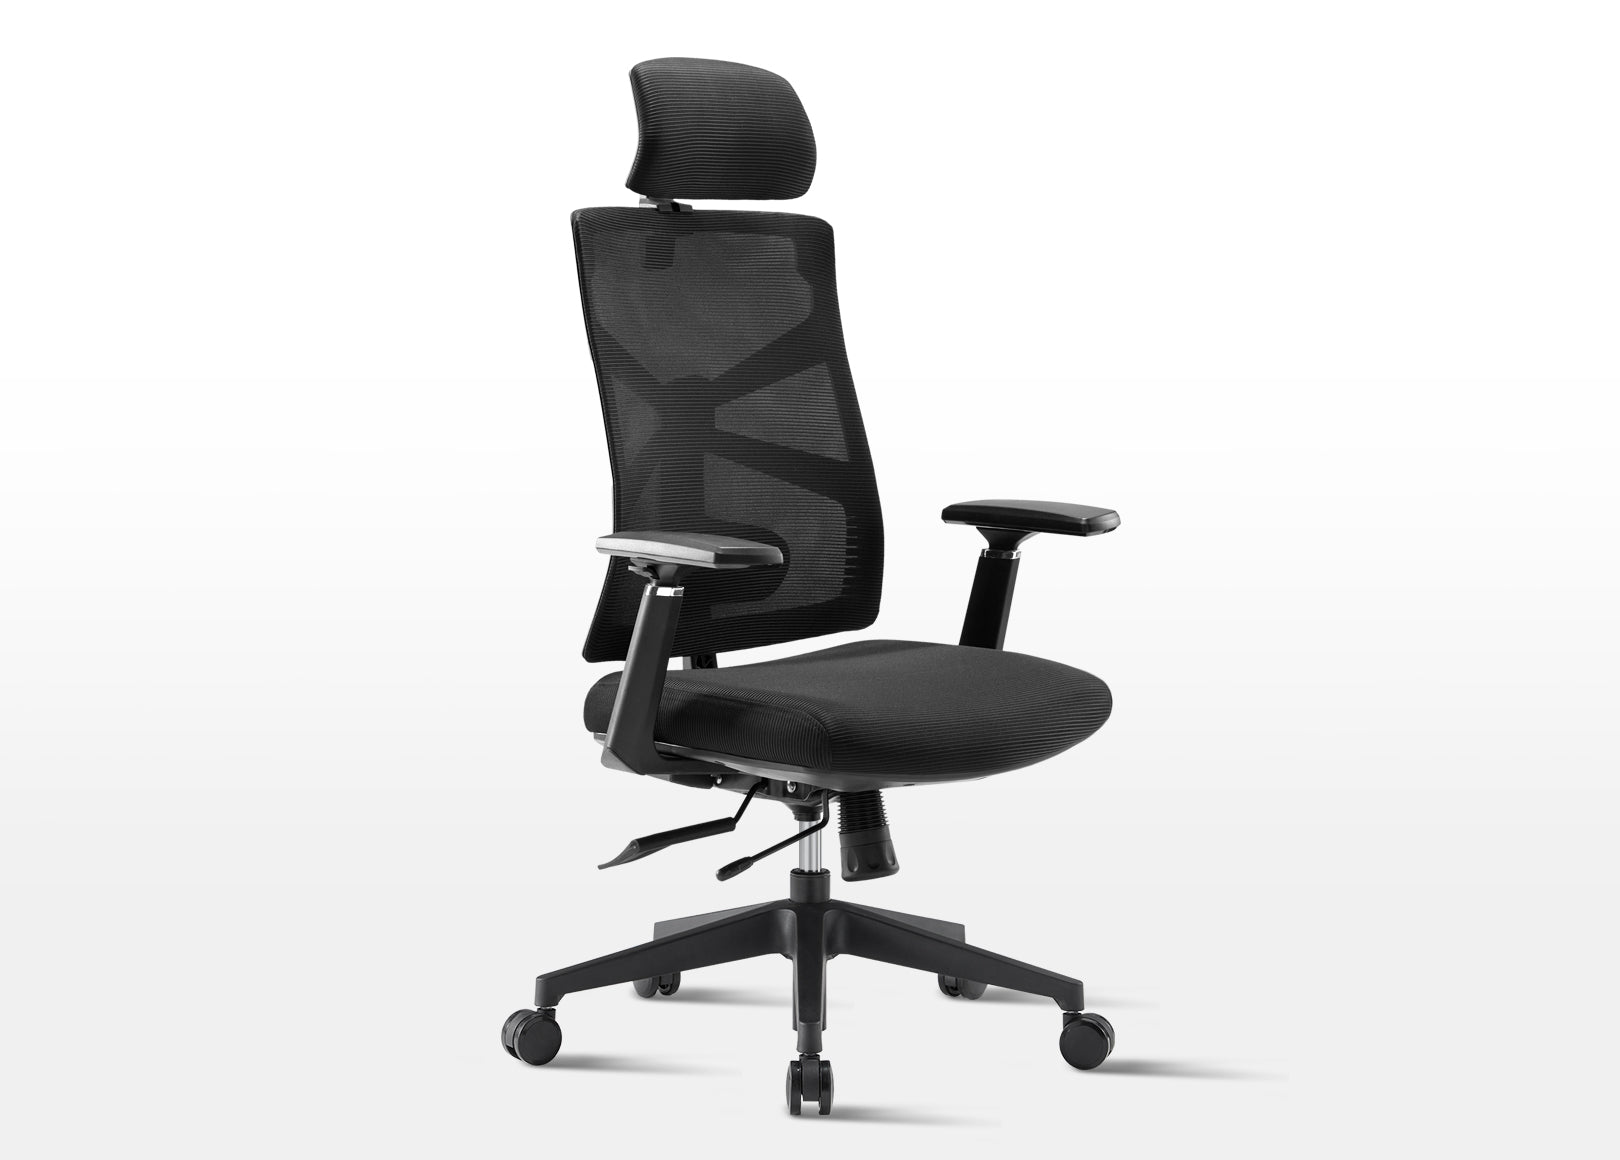 best computer chair for long hours- Stylish Black Sunaofe Voyager Pro-Posture correcting chair